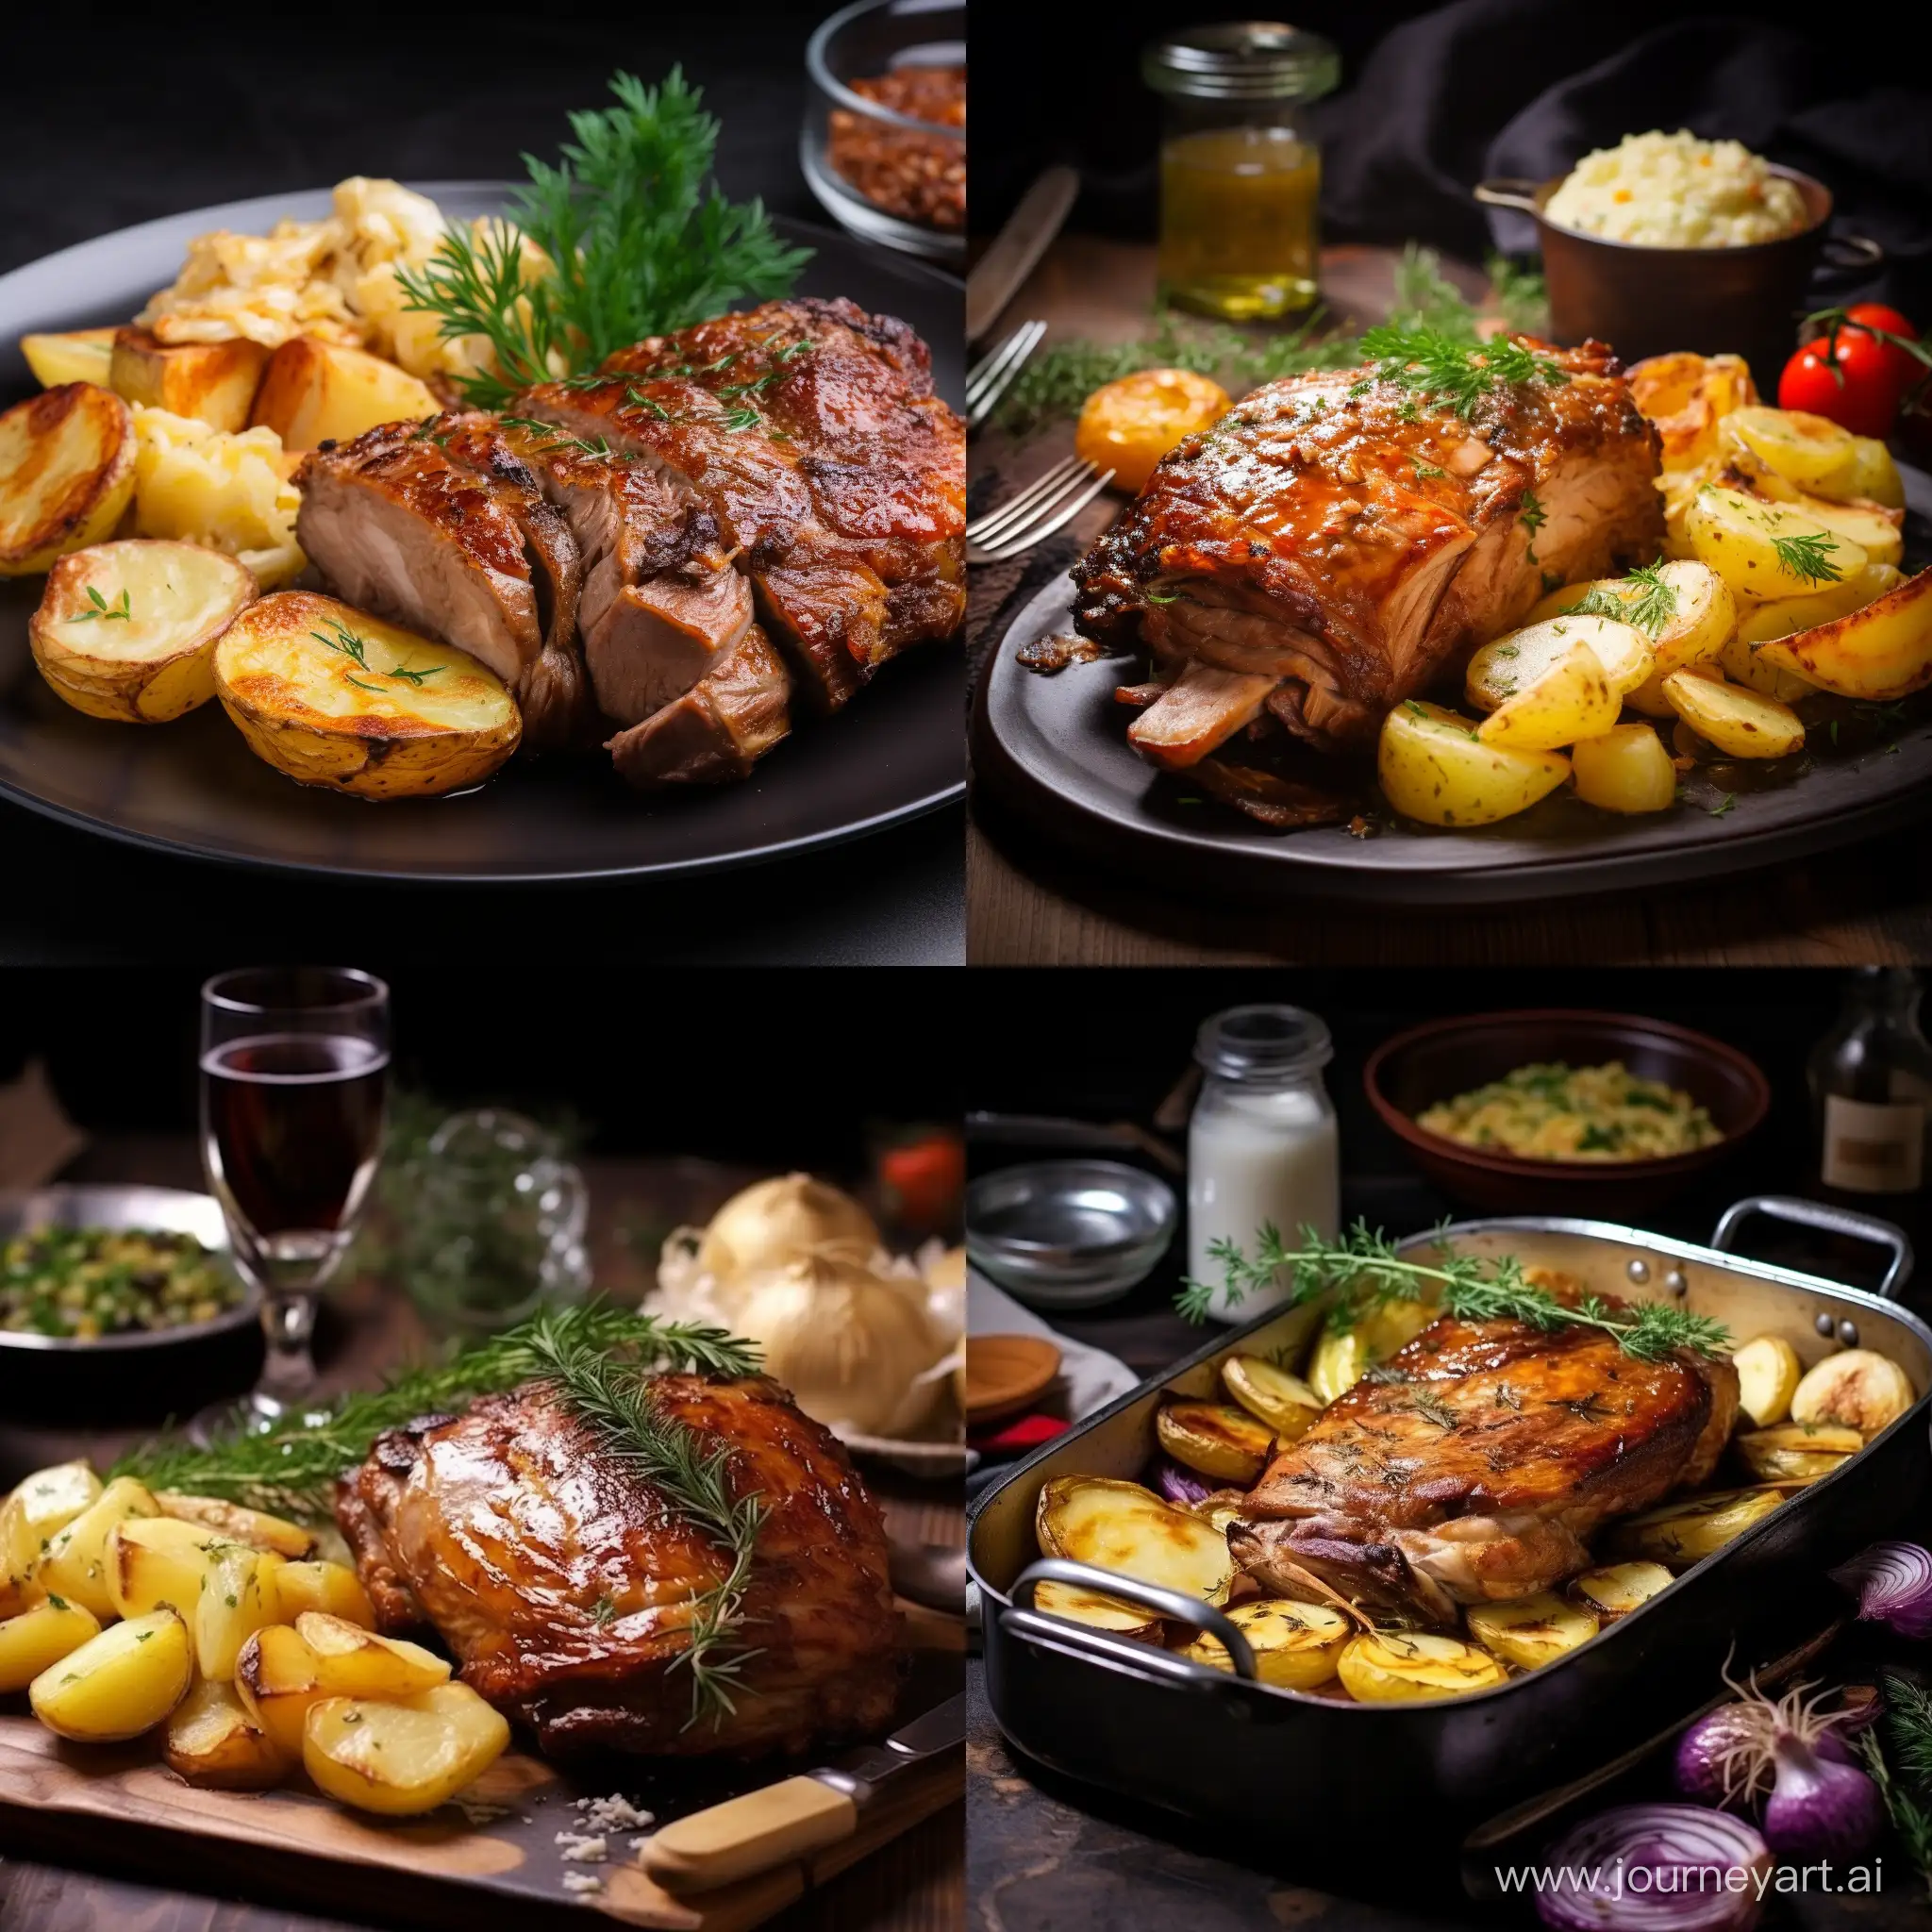 Delicious-Roast-Veal-with-Baked-Potatoes-and-White-Cabbage